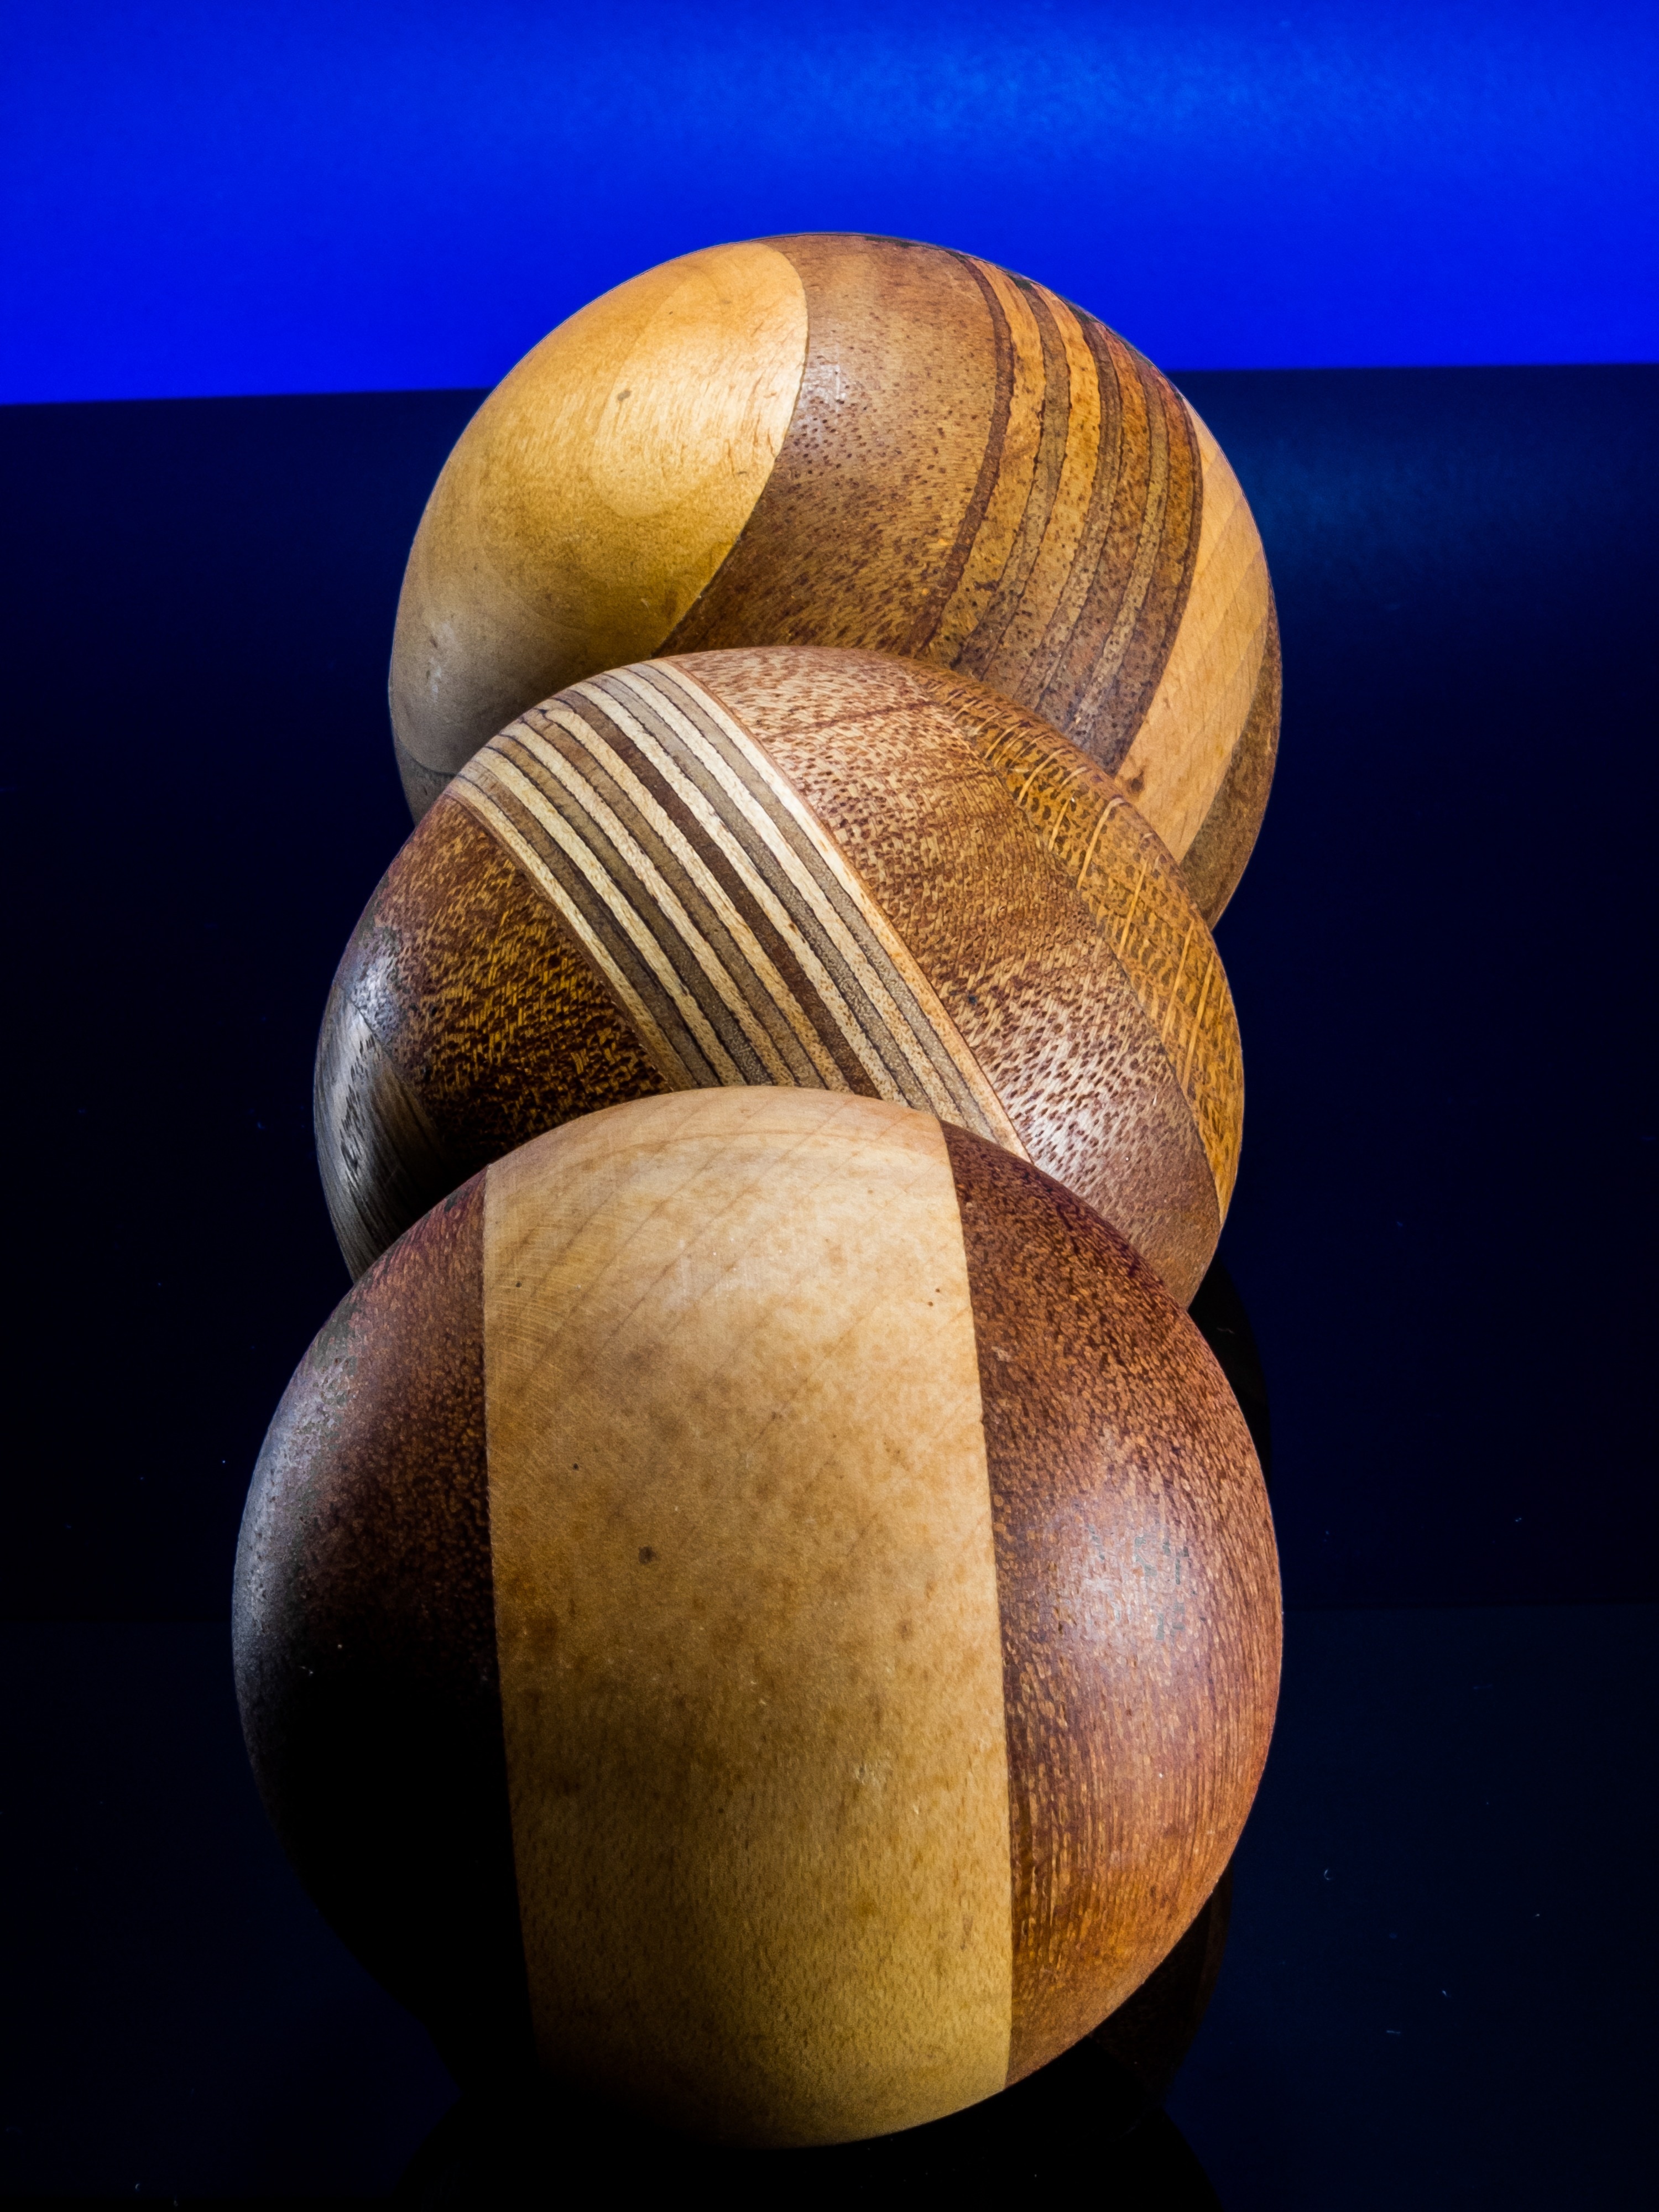 Wooden Ball, Turned, Hand Labor, studio shot, food and drink